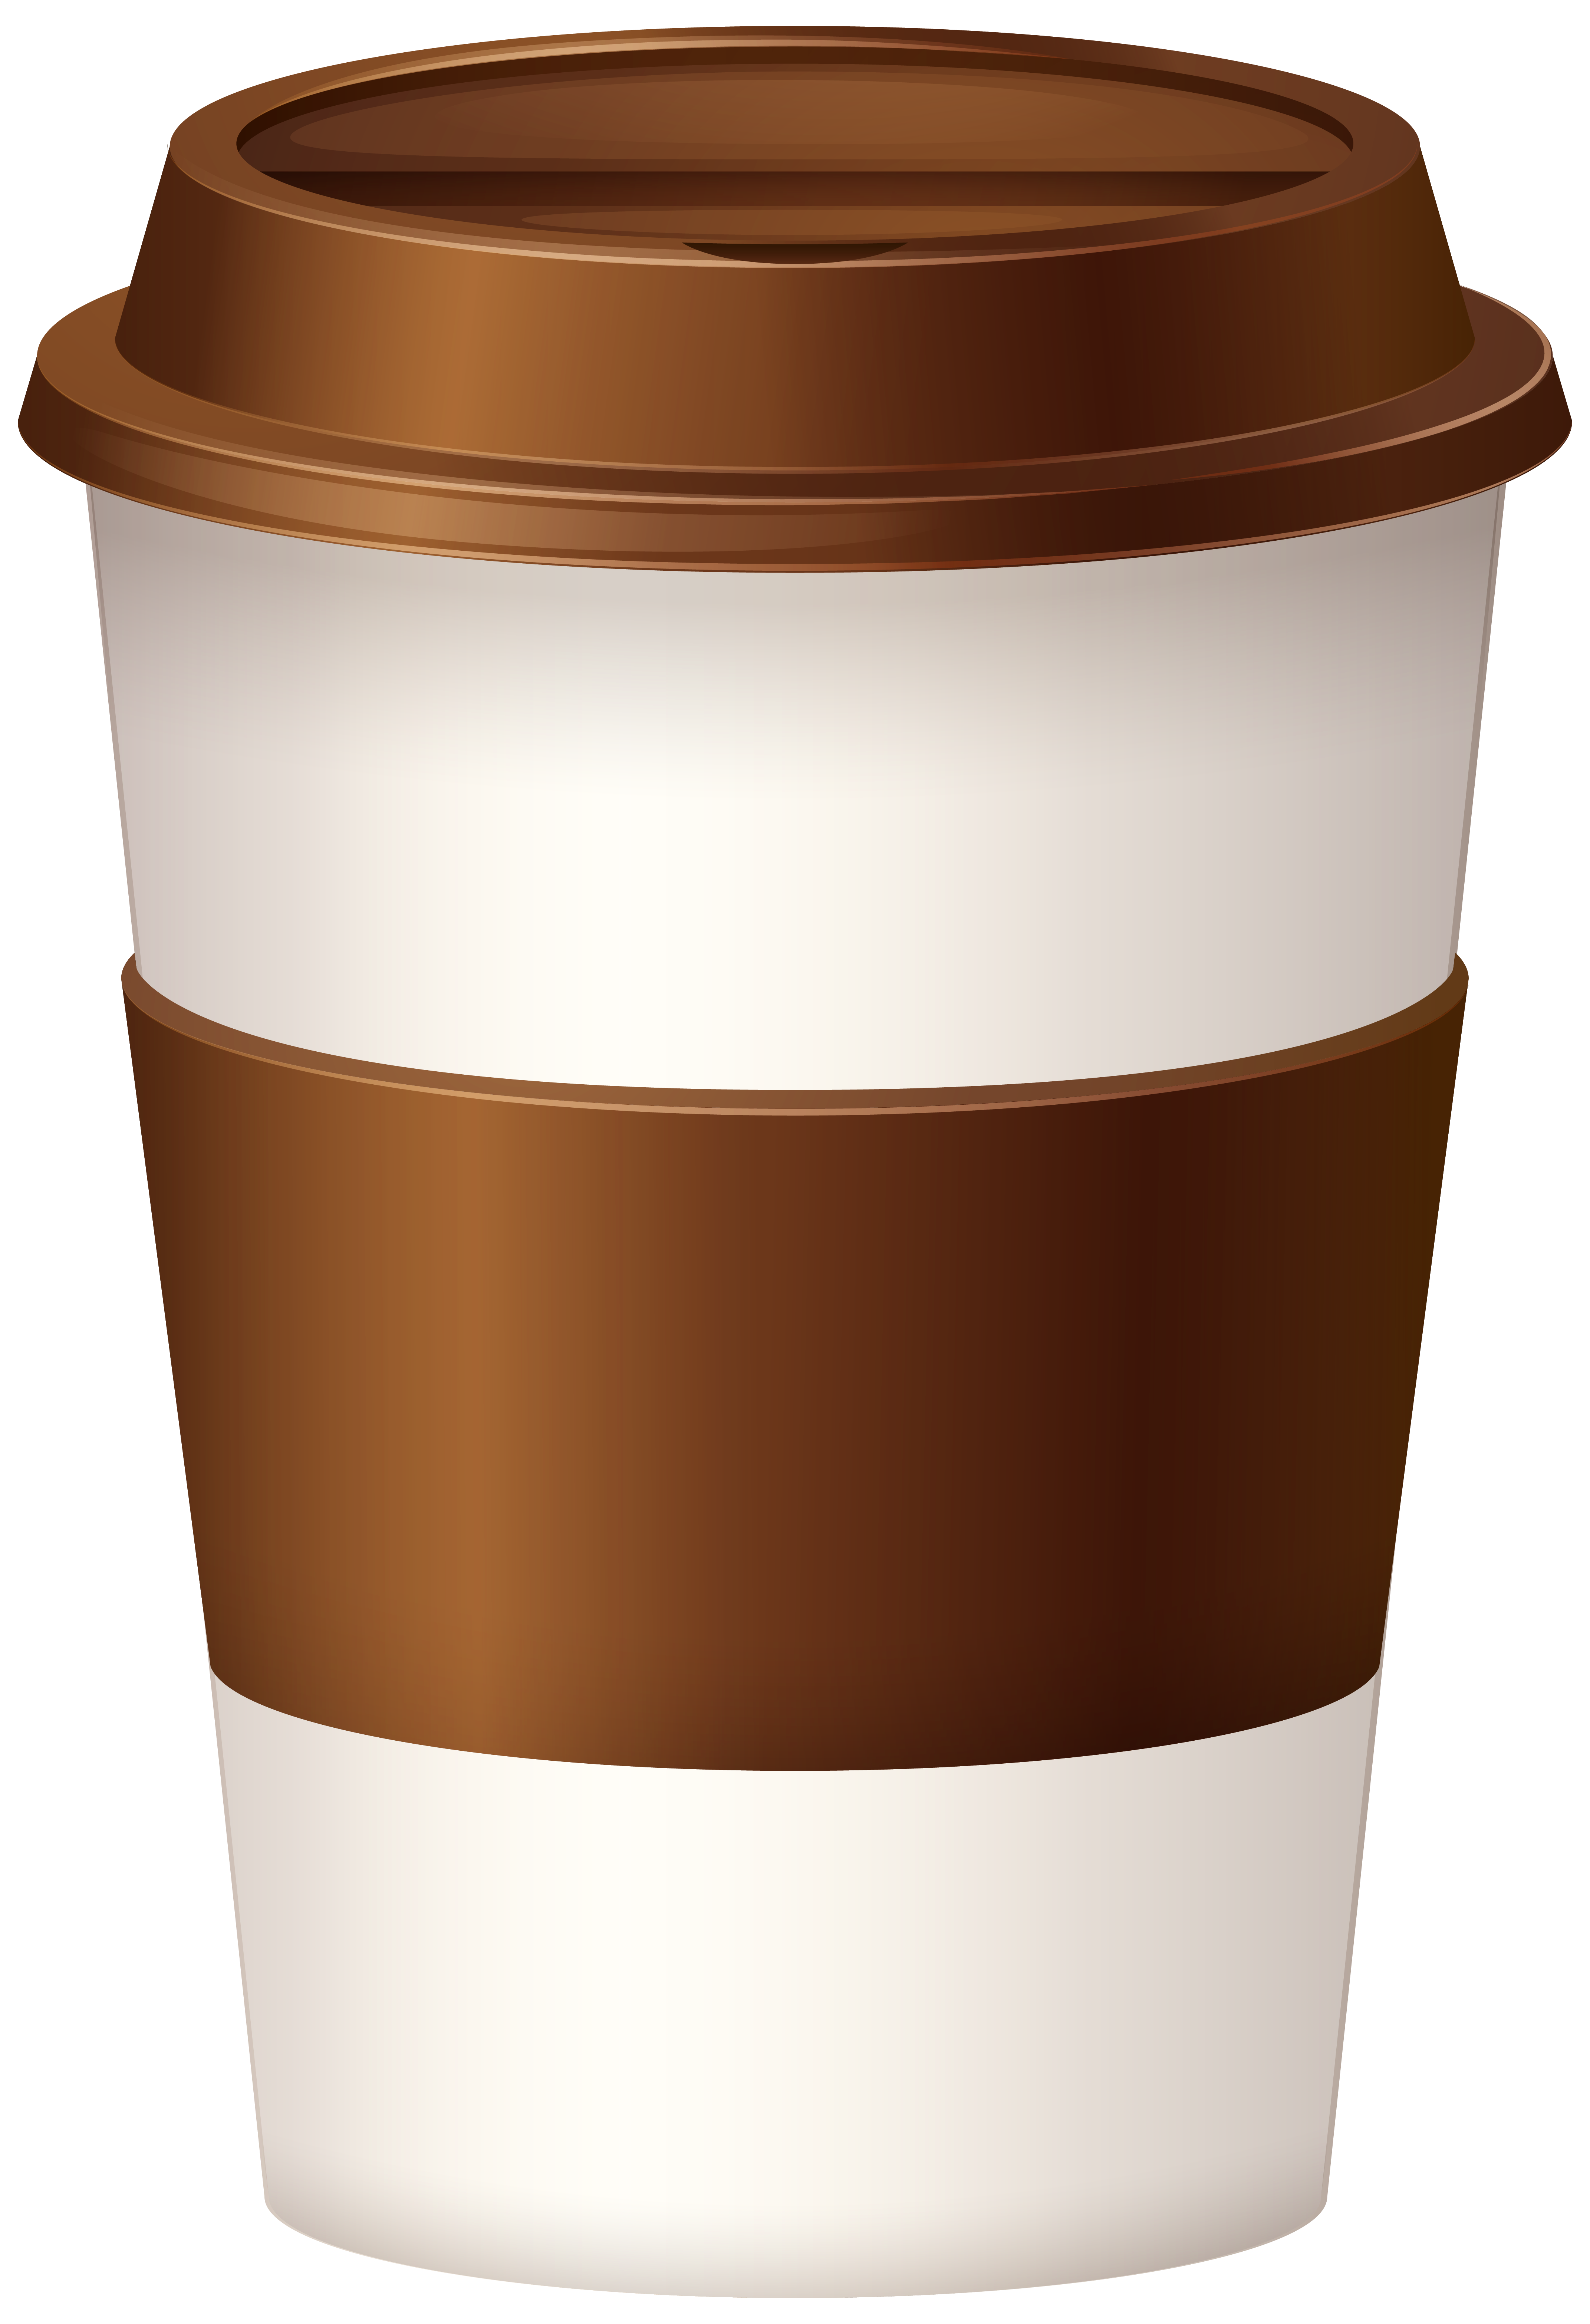 hot coffee clipart images - photo #49